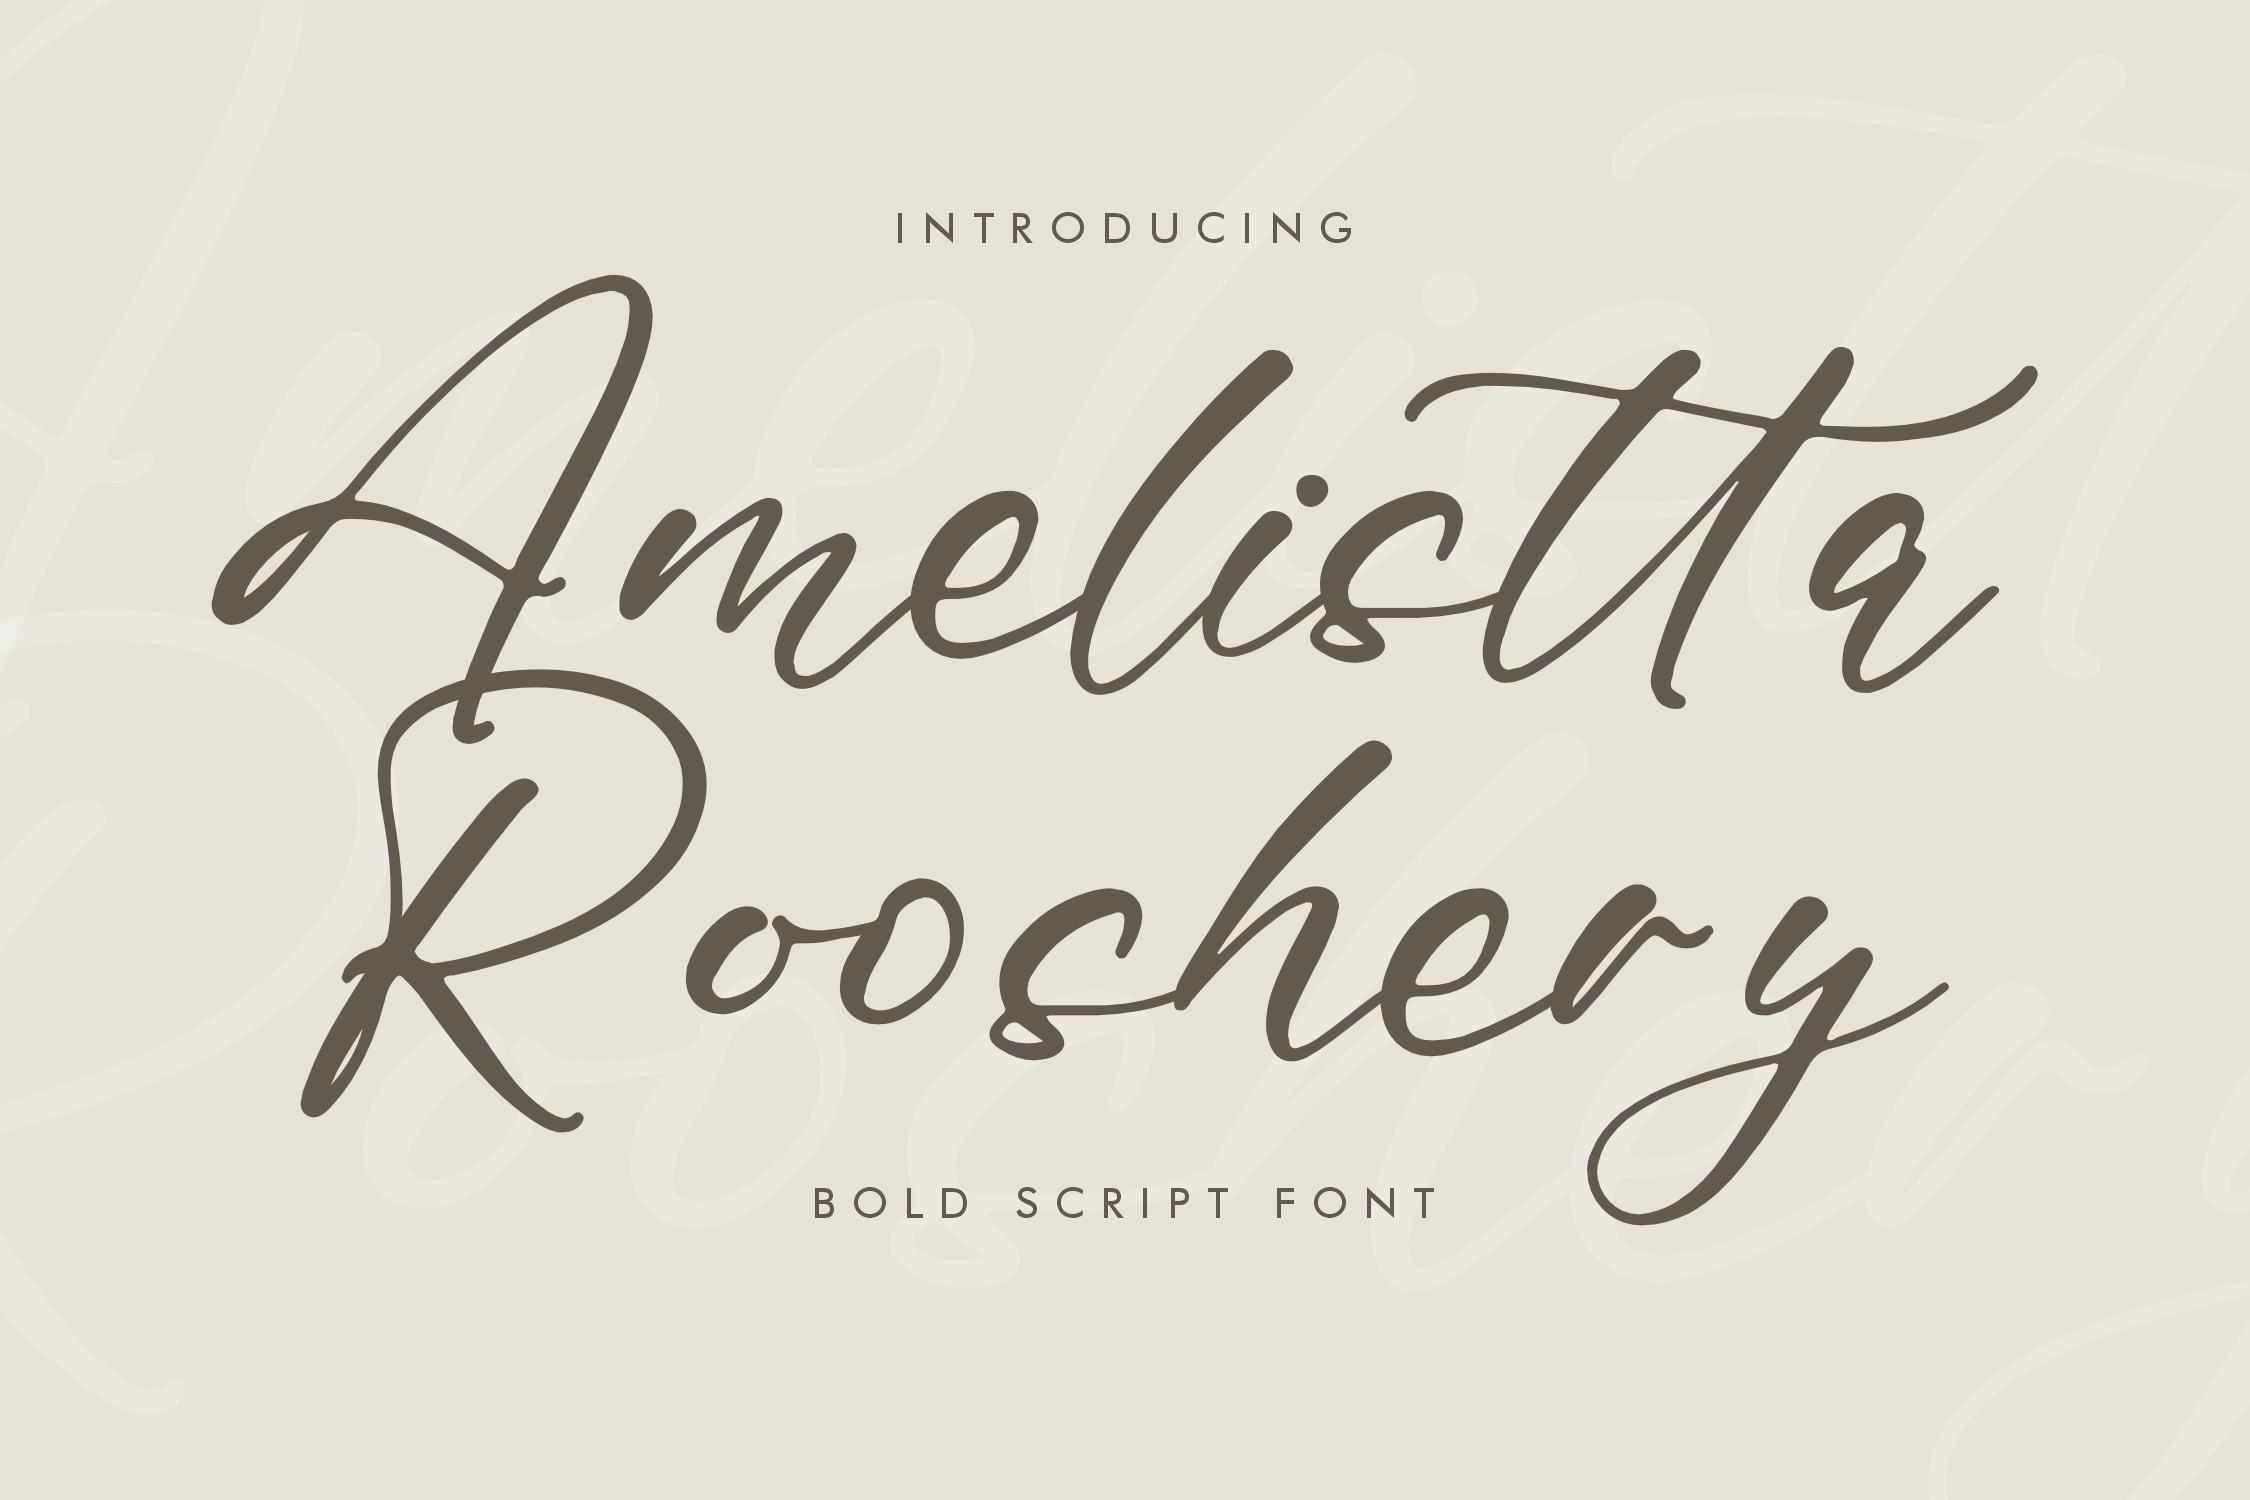 Amelistta Rooshery font preview image #5